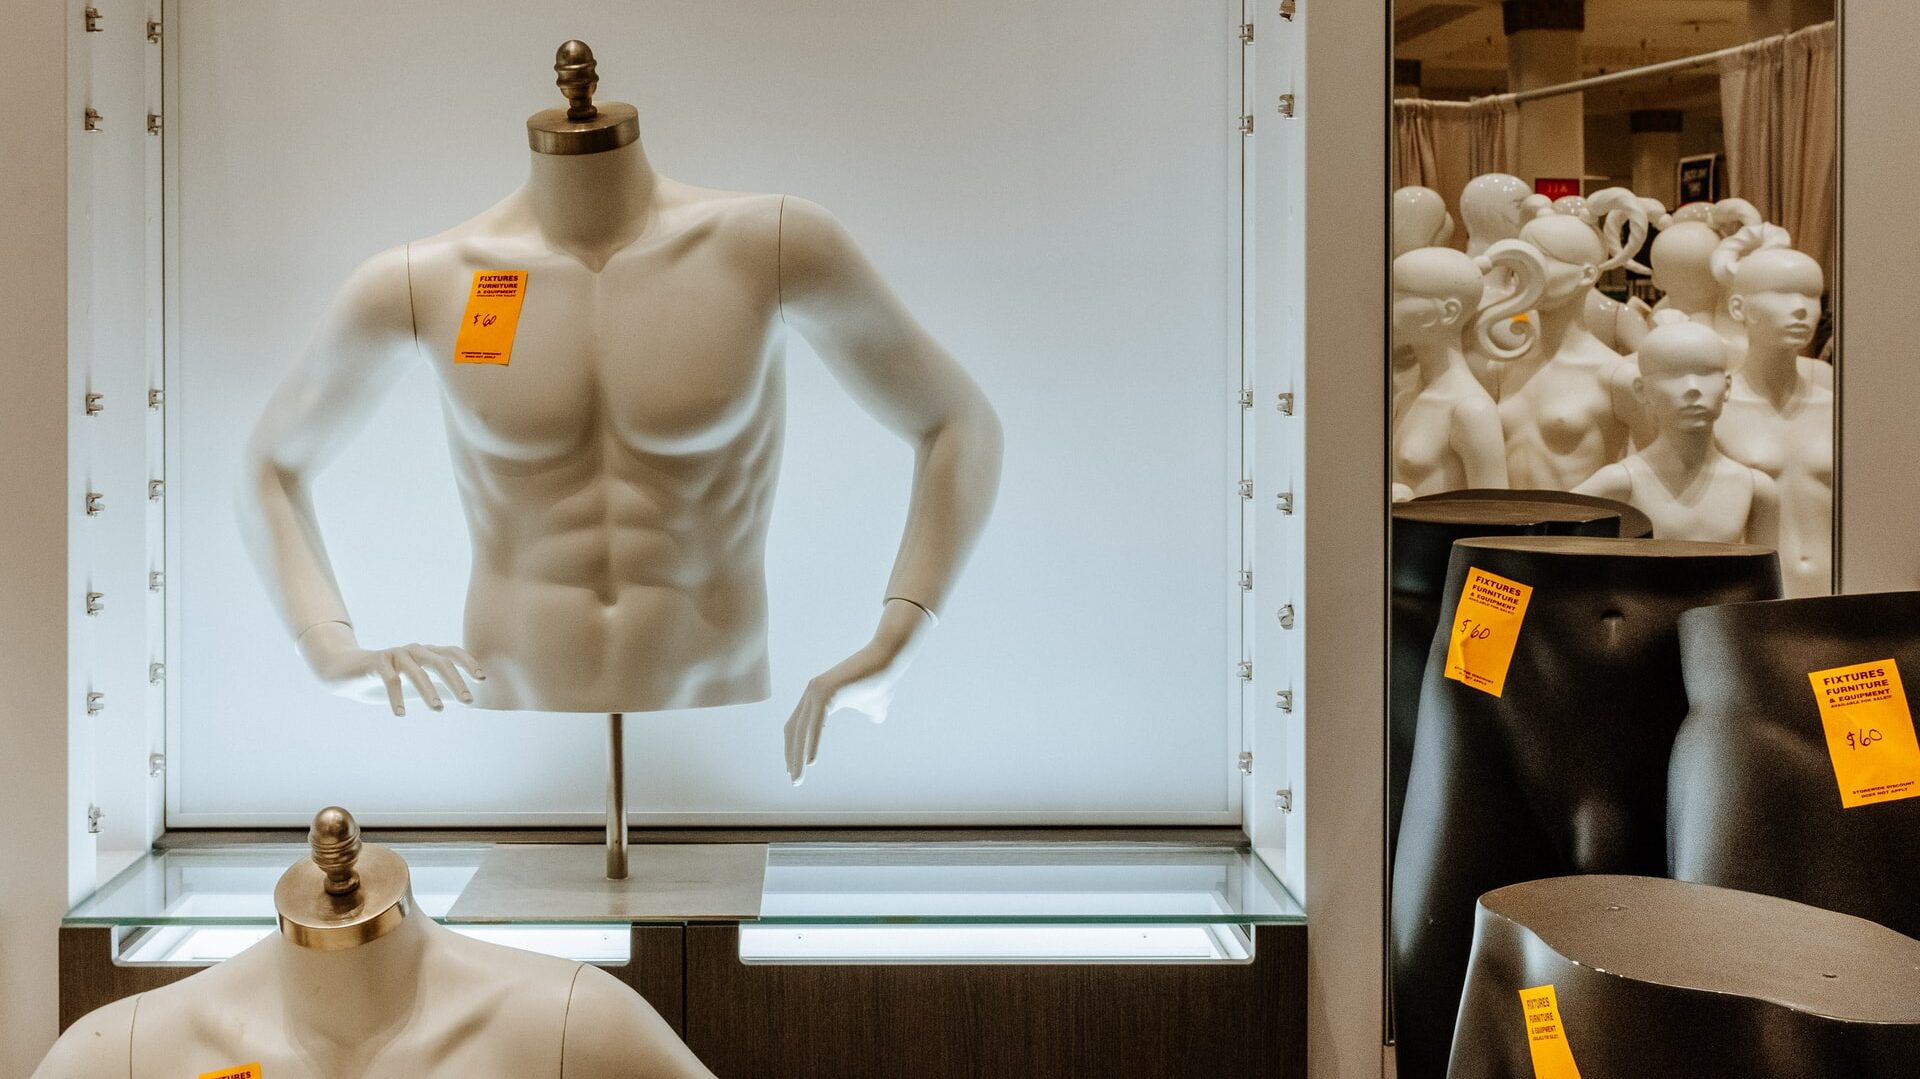 A muscular mannequin torso with a price tag on it. Several femme mannequins are piled together in the background.